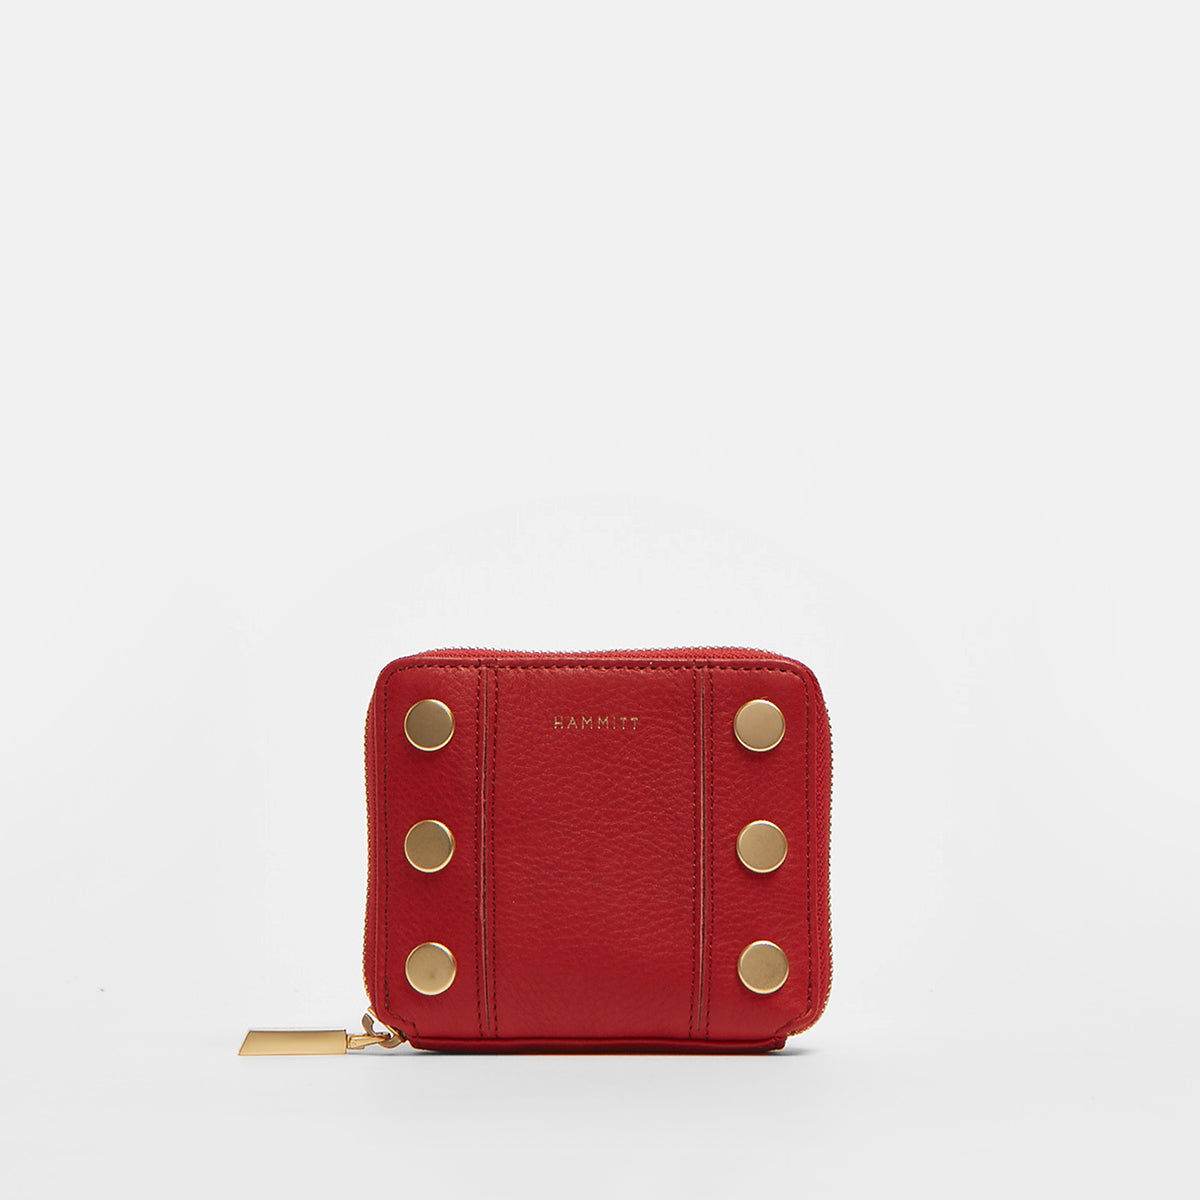 5 North Wallet - Winter Cherry Brushed Gold